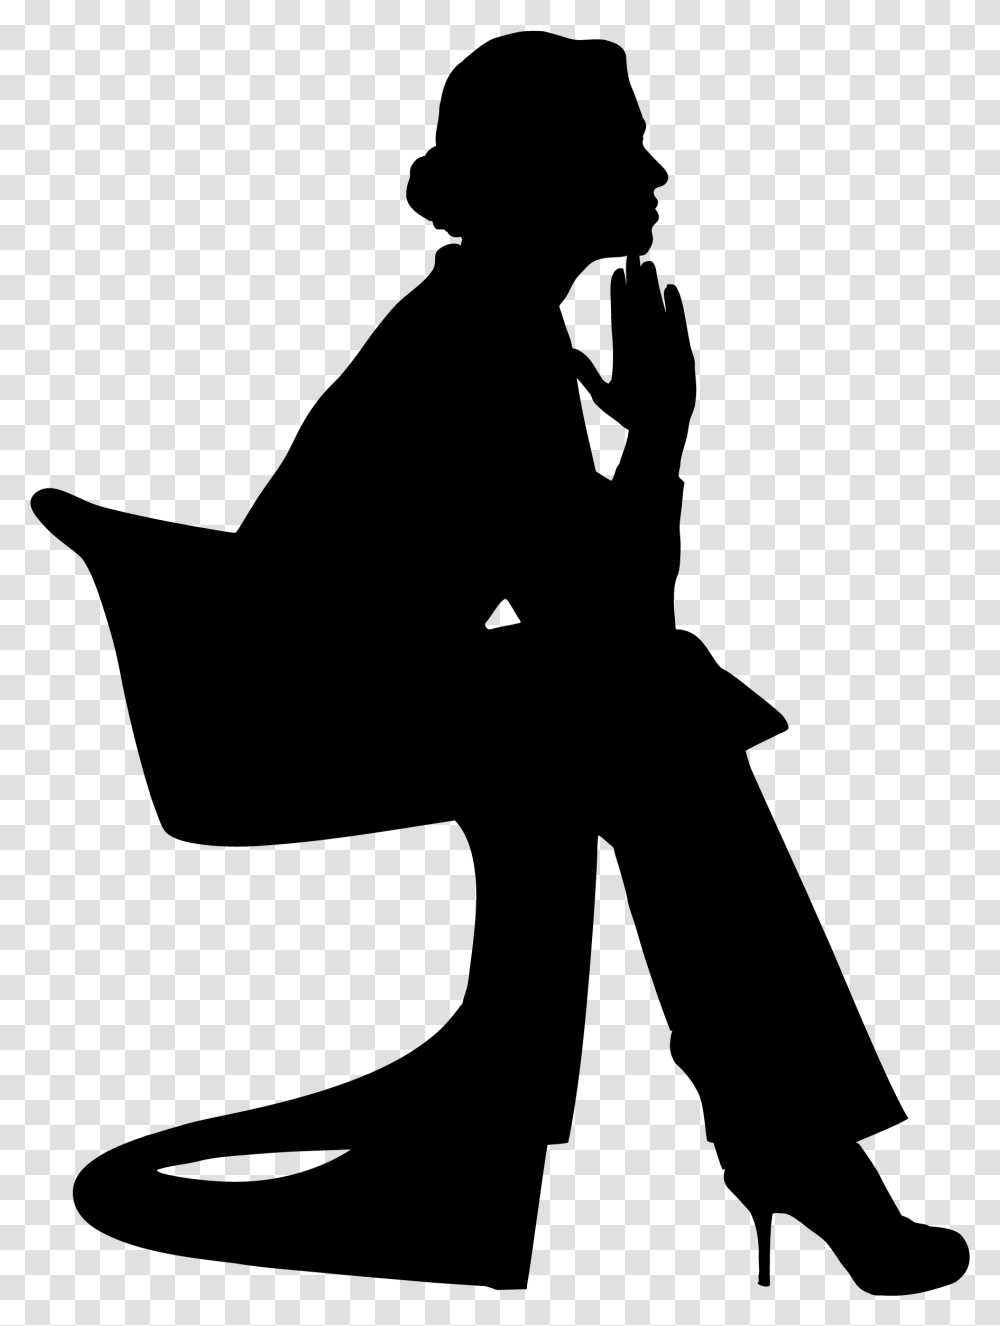 Woman Thinking Silhouette Download Black Woman Thinking Silhouette, Gray Transparent Png